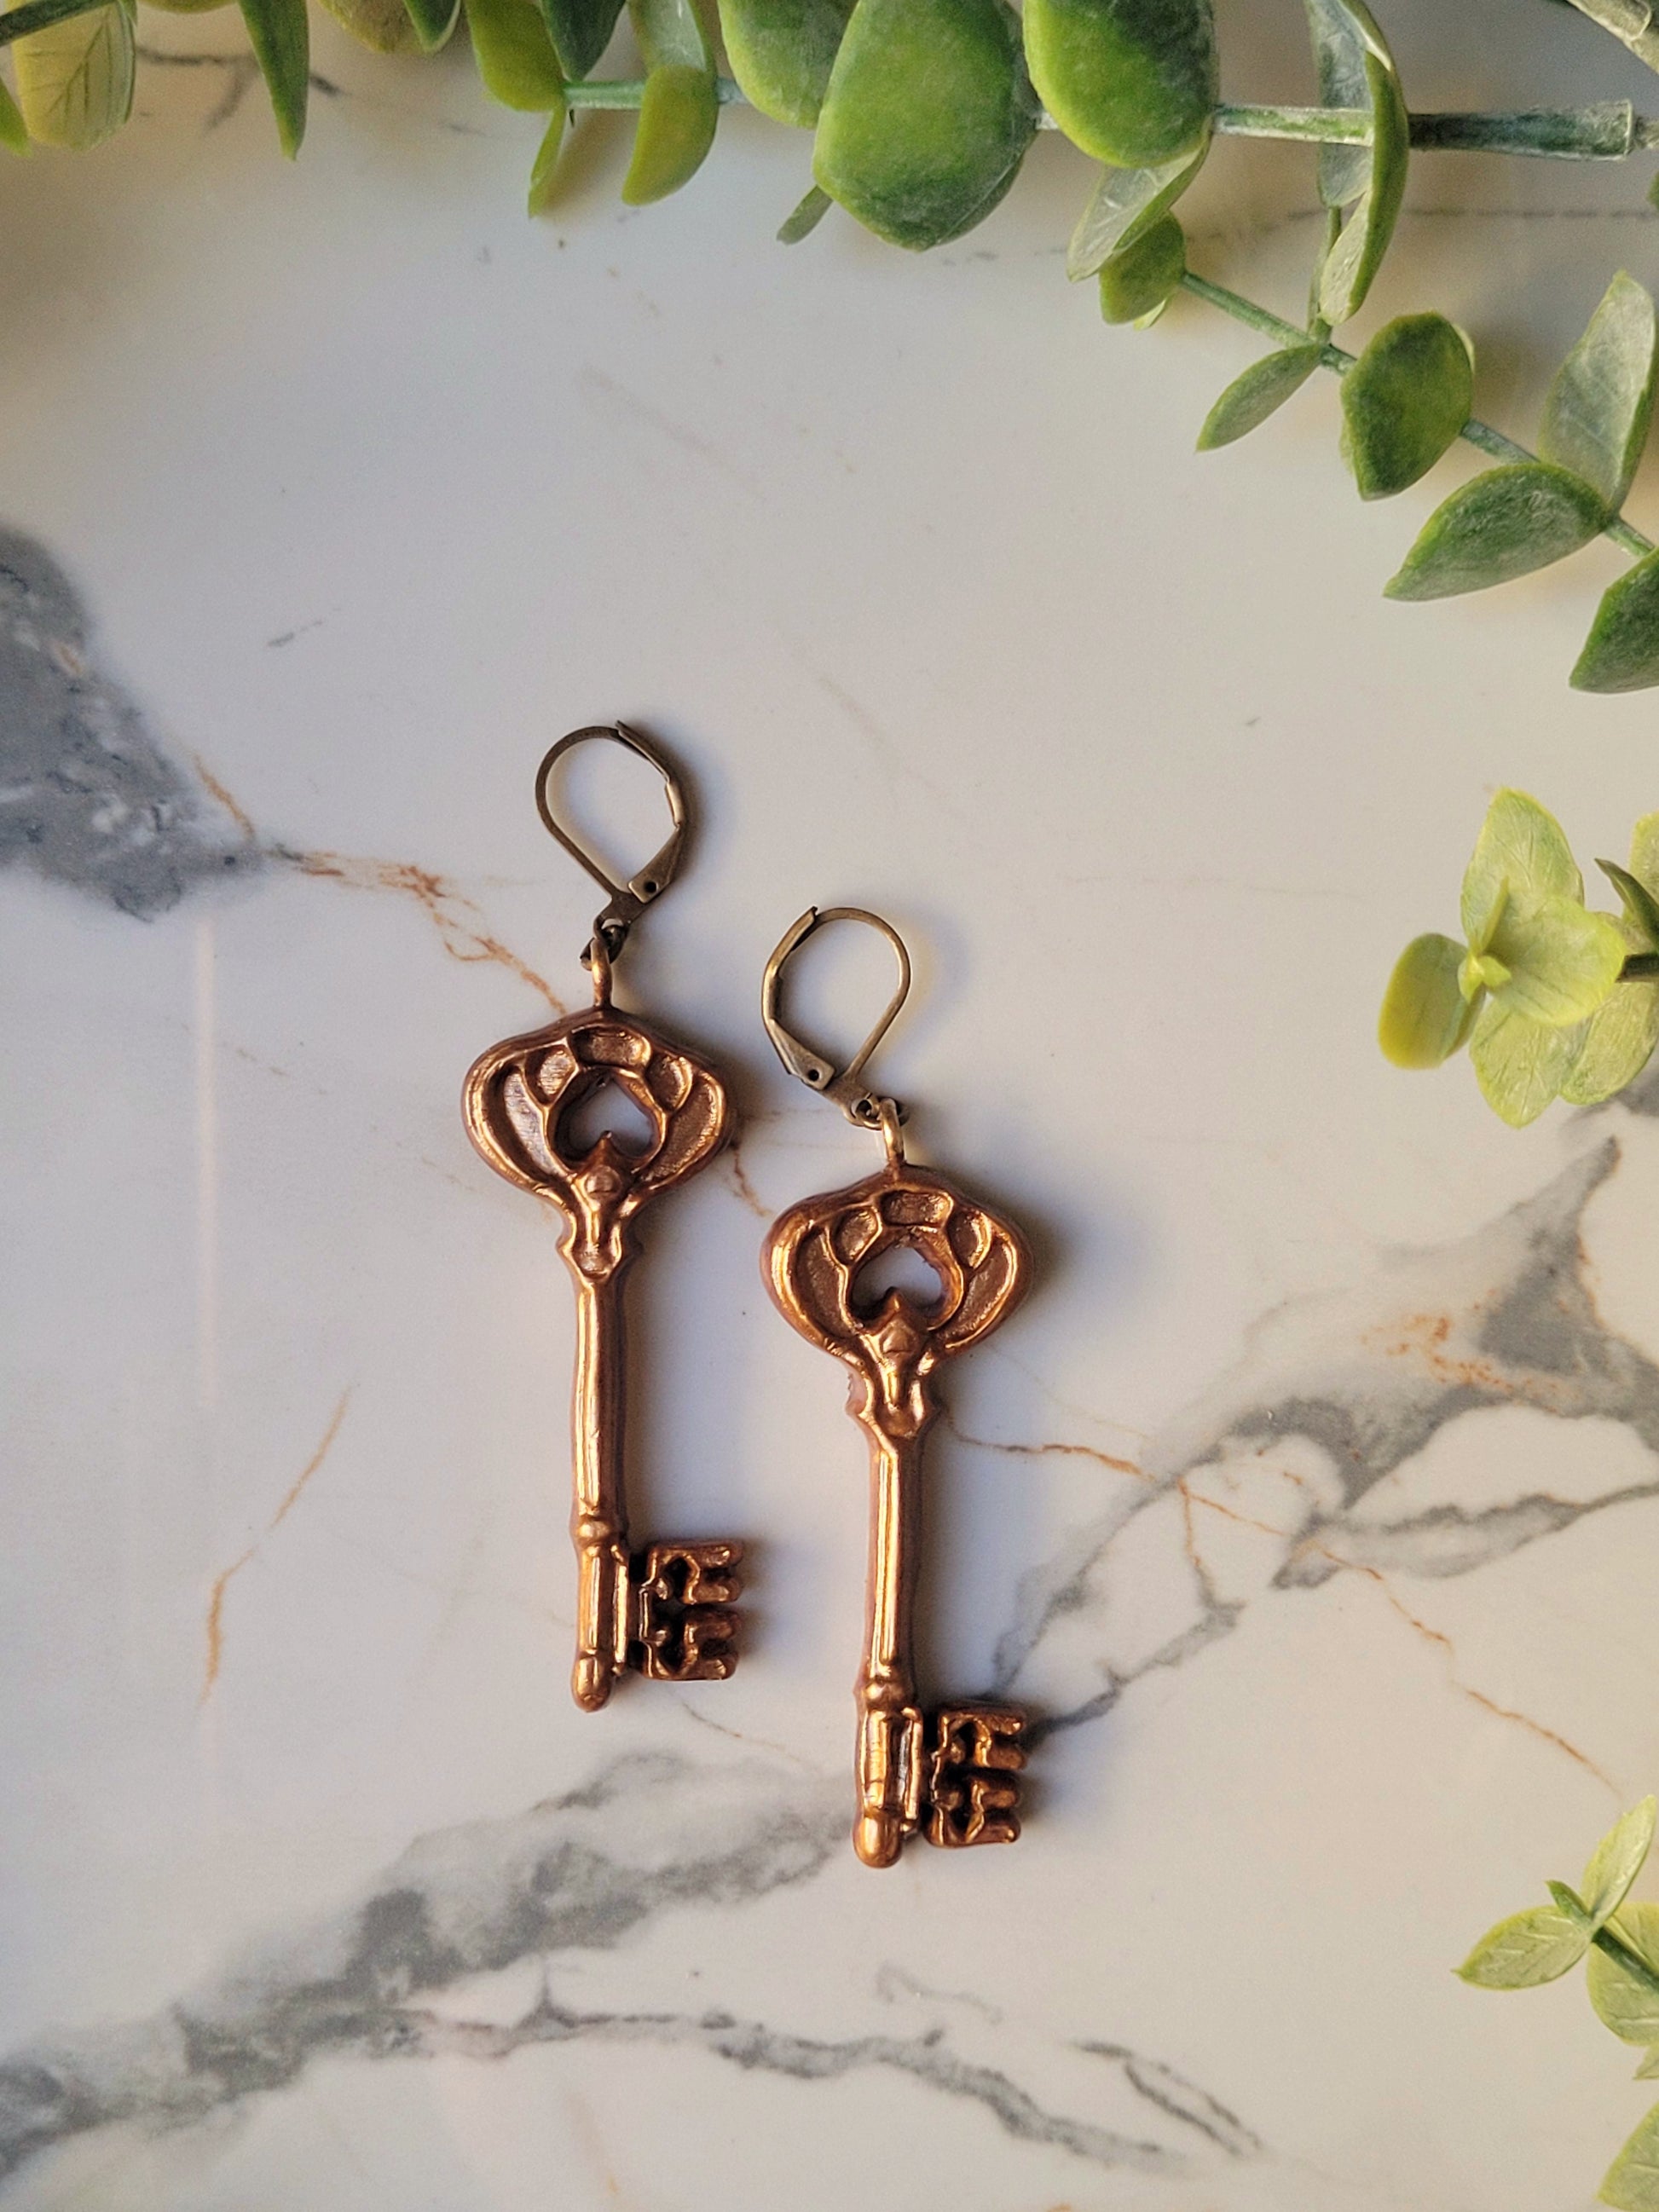 close up of spade shaped skeleton key earrings with filigree in antique gold on a marble background with foliage. 